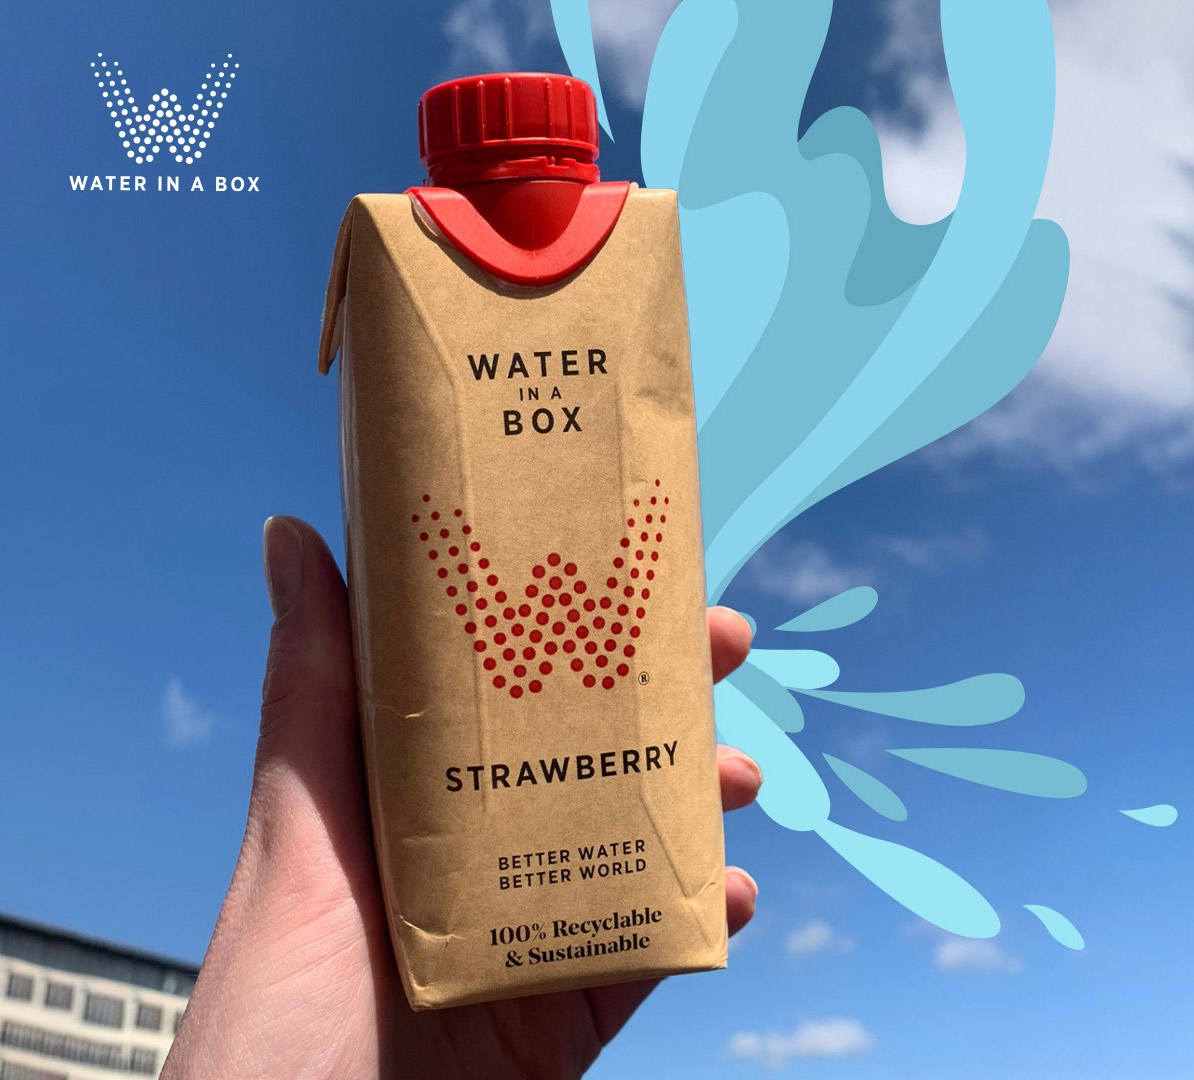 Taste a sustainable splash of strawberry 🍓

Perfect for quenching a thirst for fruit, our strawberry-flavoured water is the ideal plastic alternative to keep you hydrated whilst on the go 💦

#WaterInABox #Hydration #Sustainable #SustainableWater #BritishWater